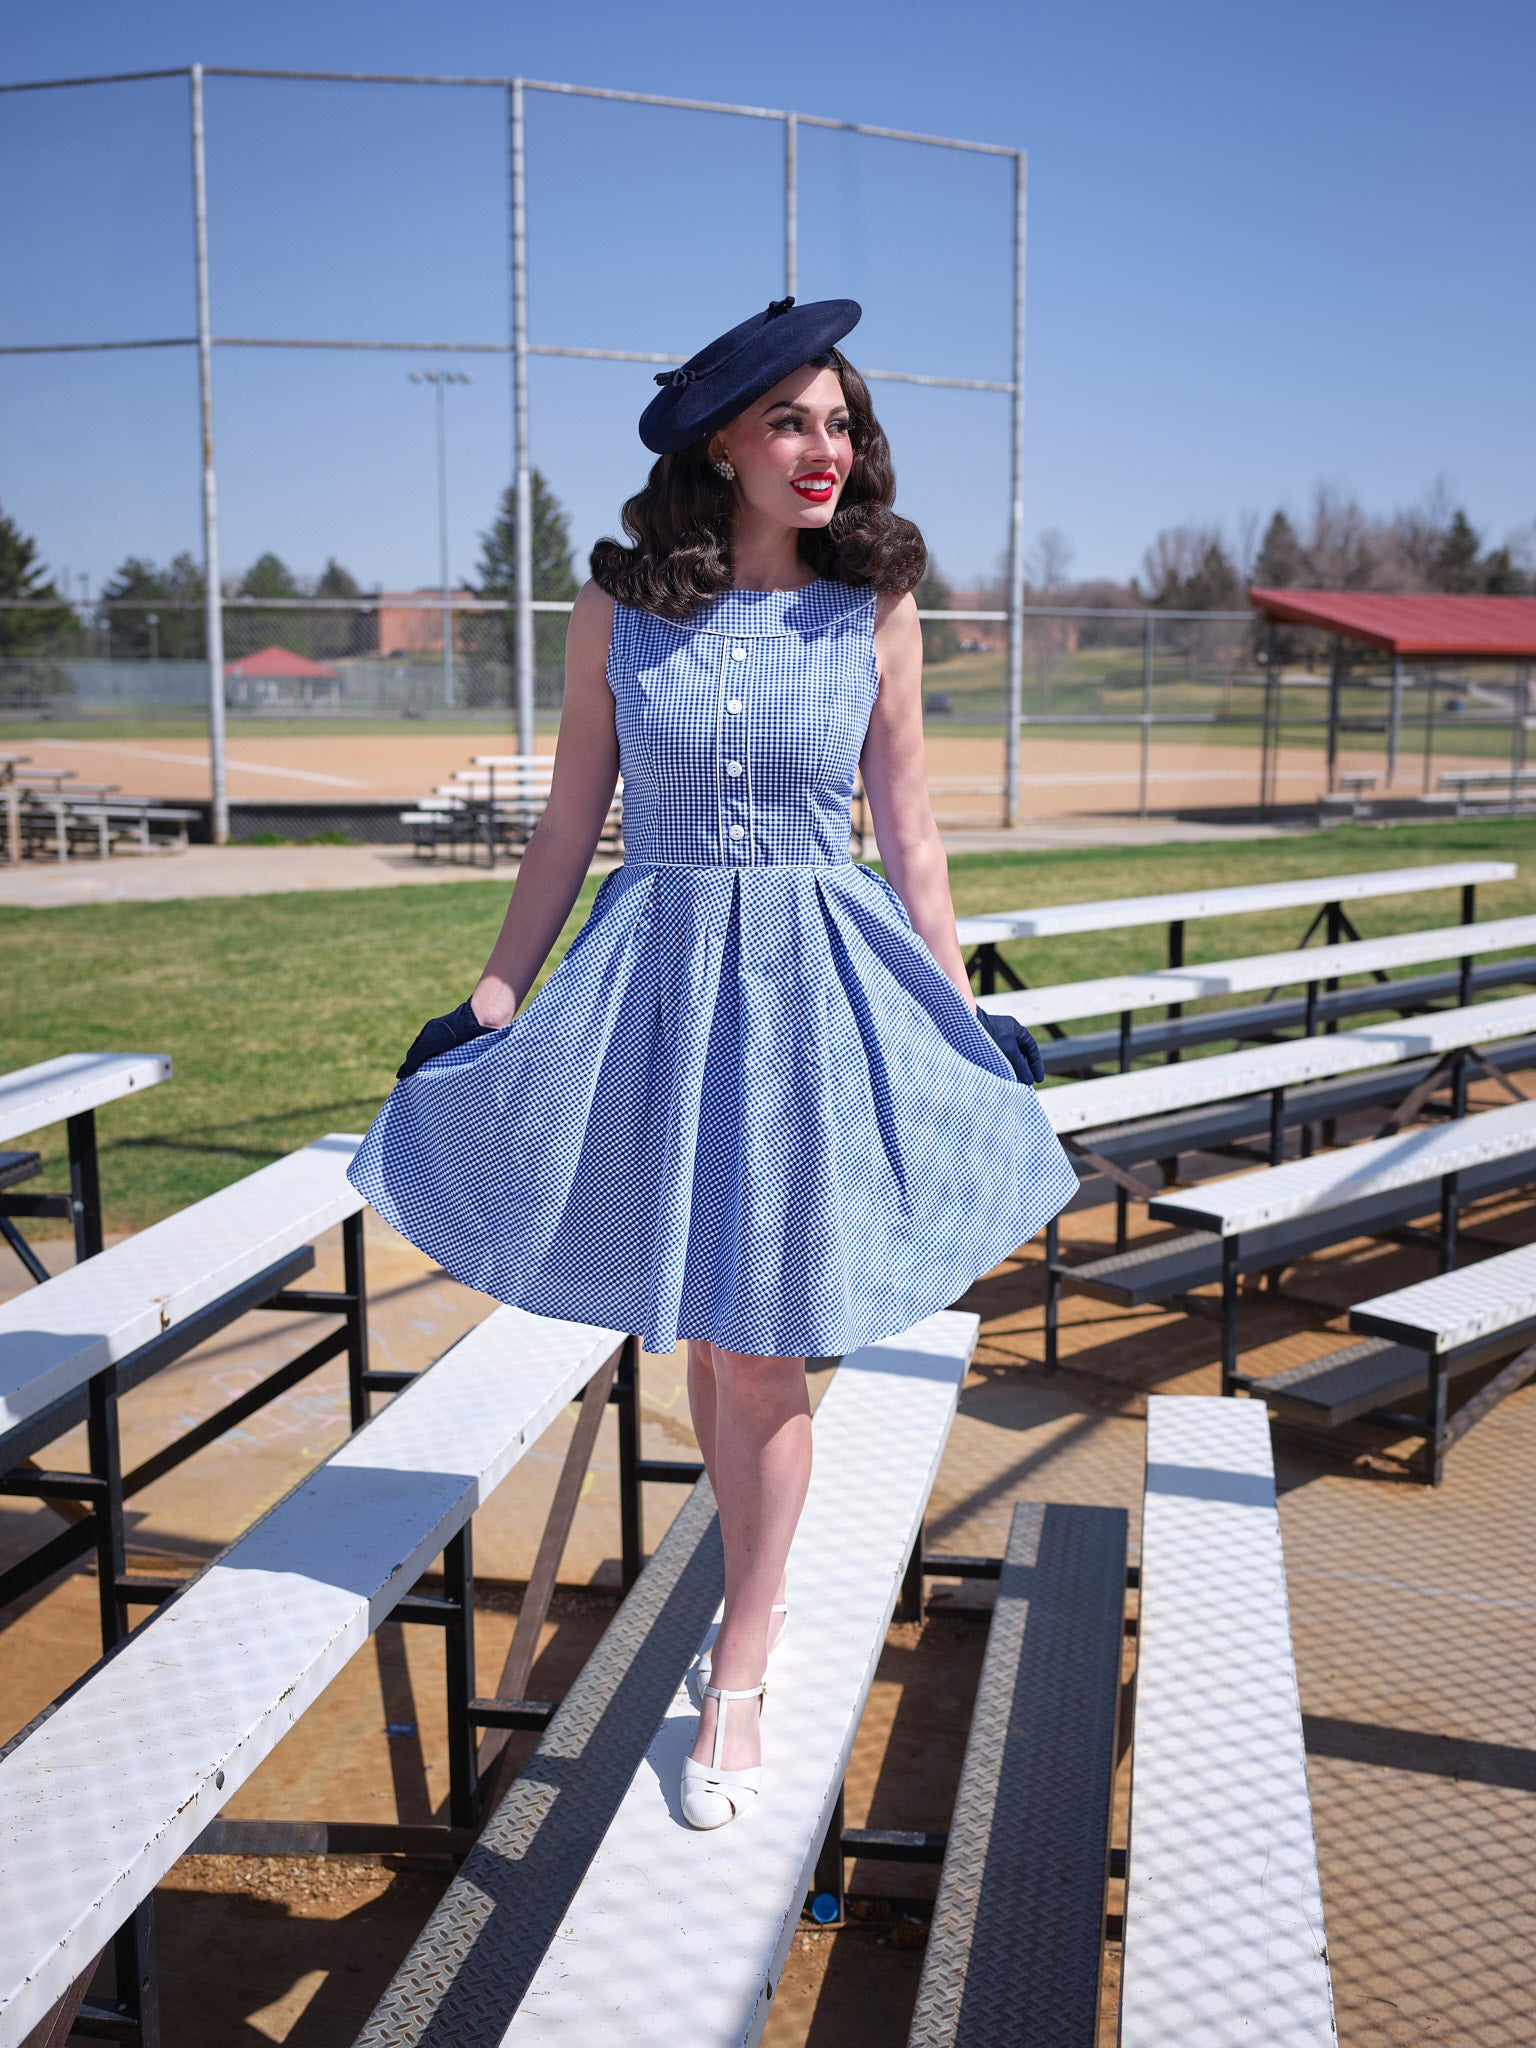 a full size of a model wearing elizabeth dress in gingham and vintage hat and gloves standibg on bleachers